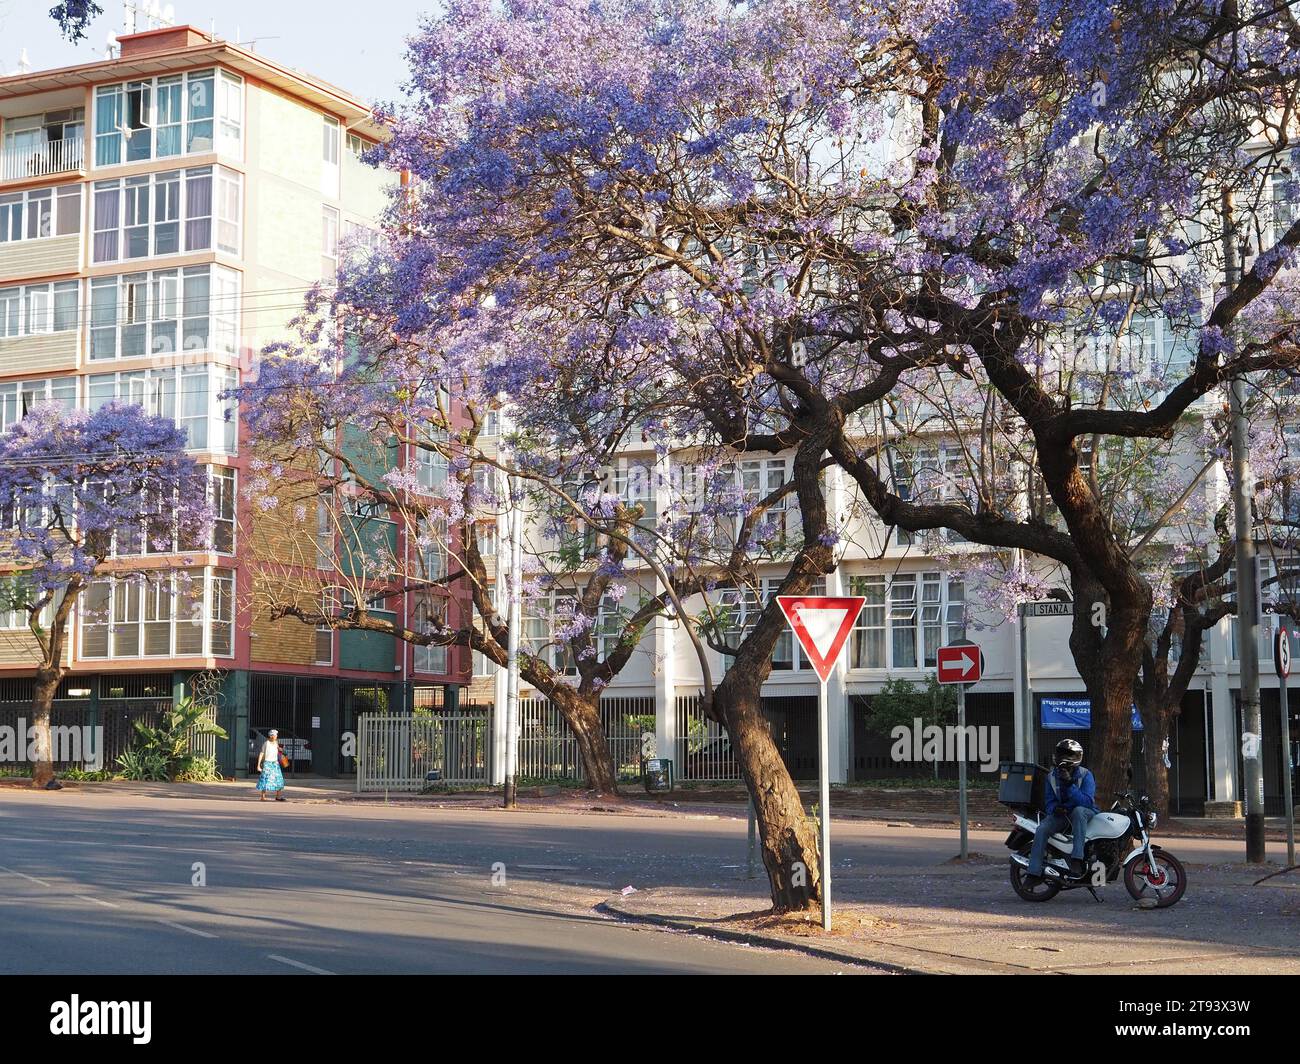 Street in Pretoria with the famous purple jacaranda trees, Gauteng province, South Africa. Stock Photo